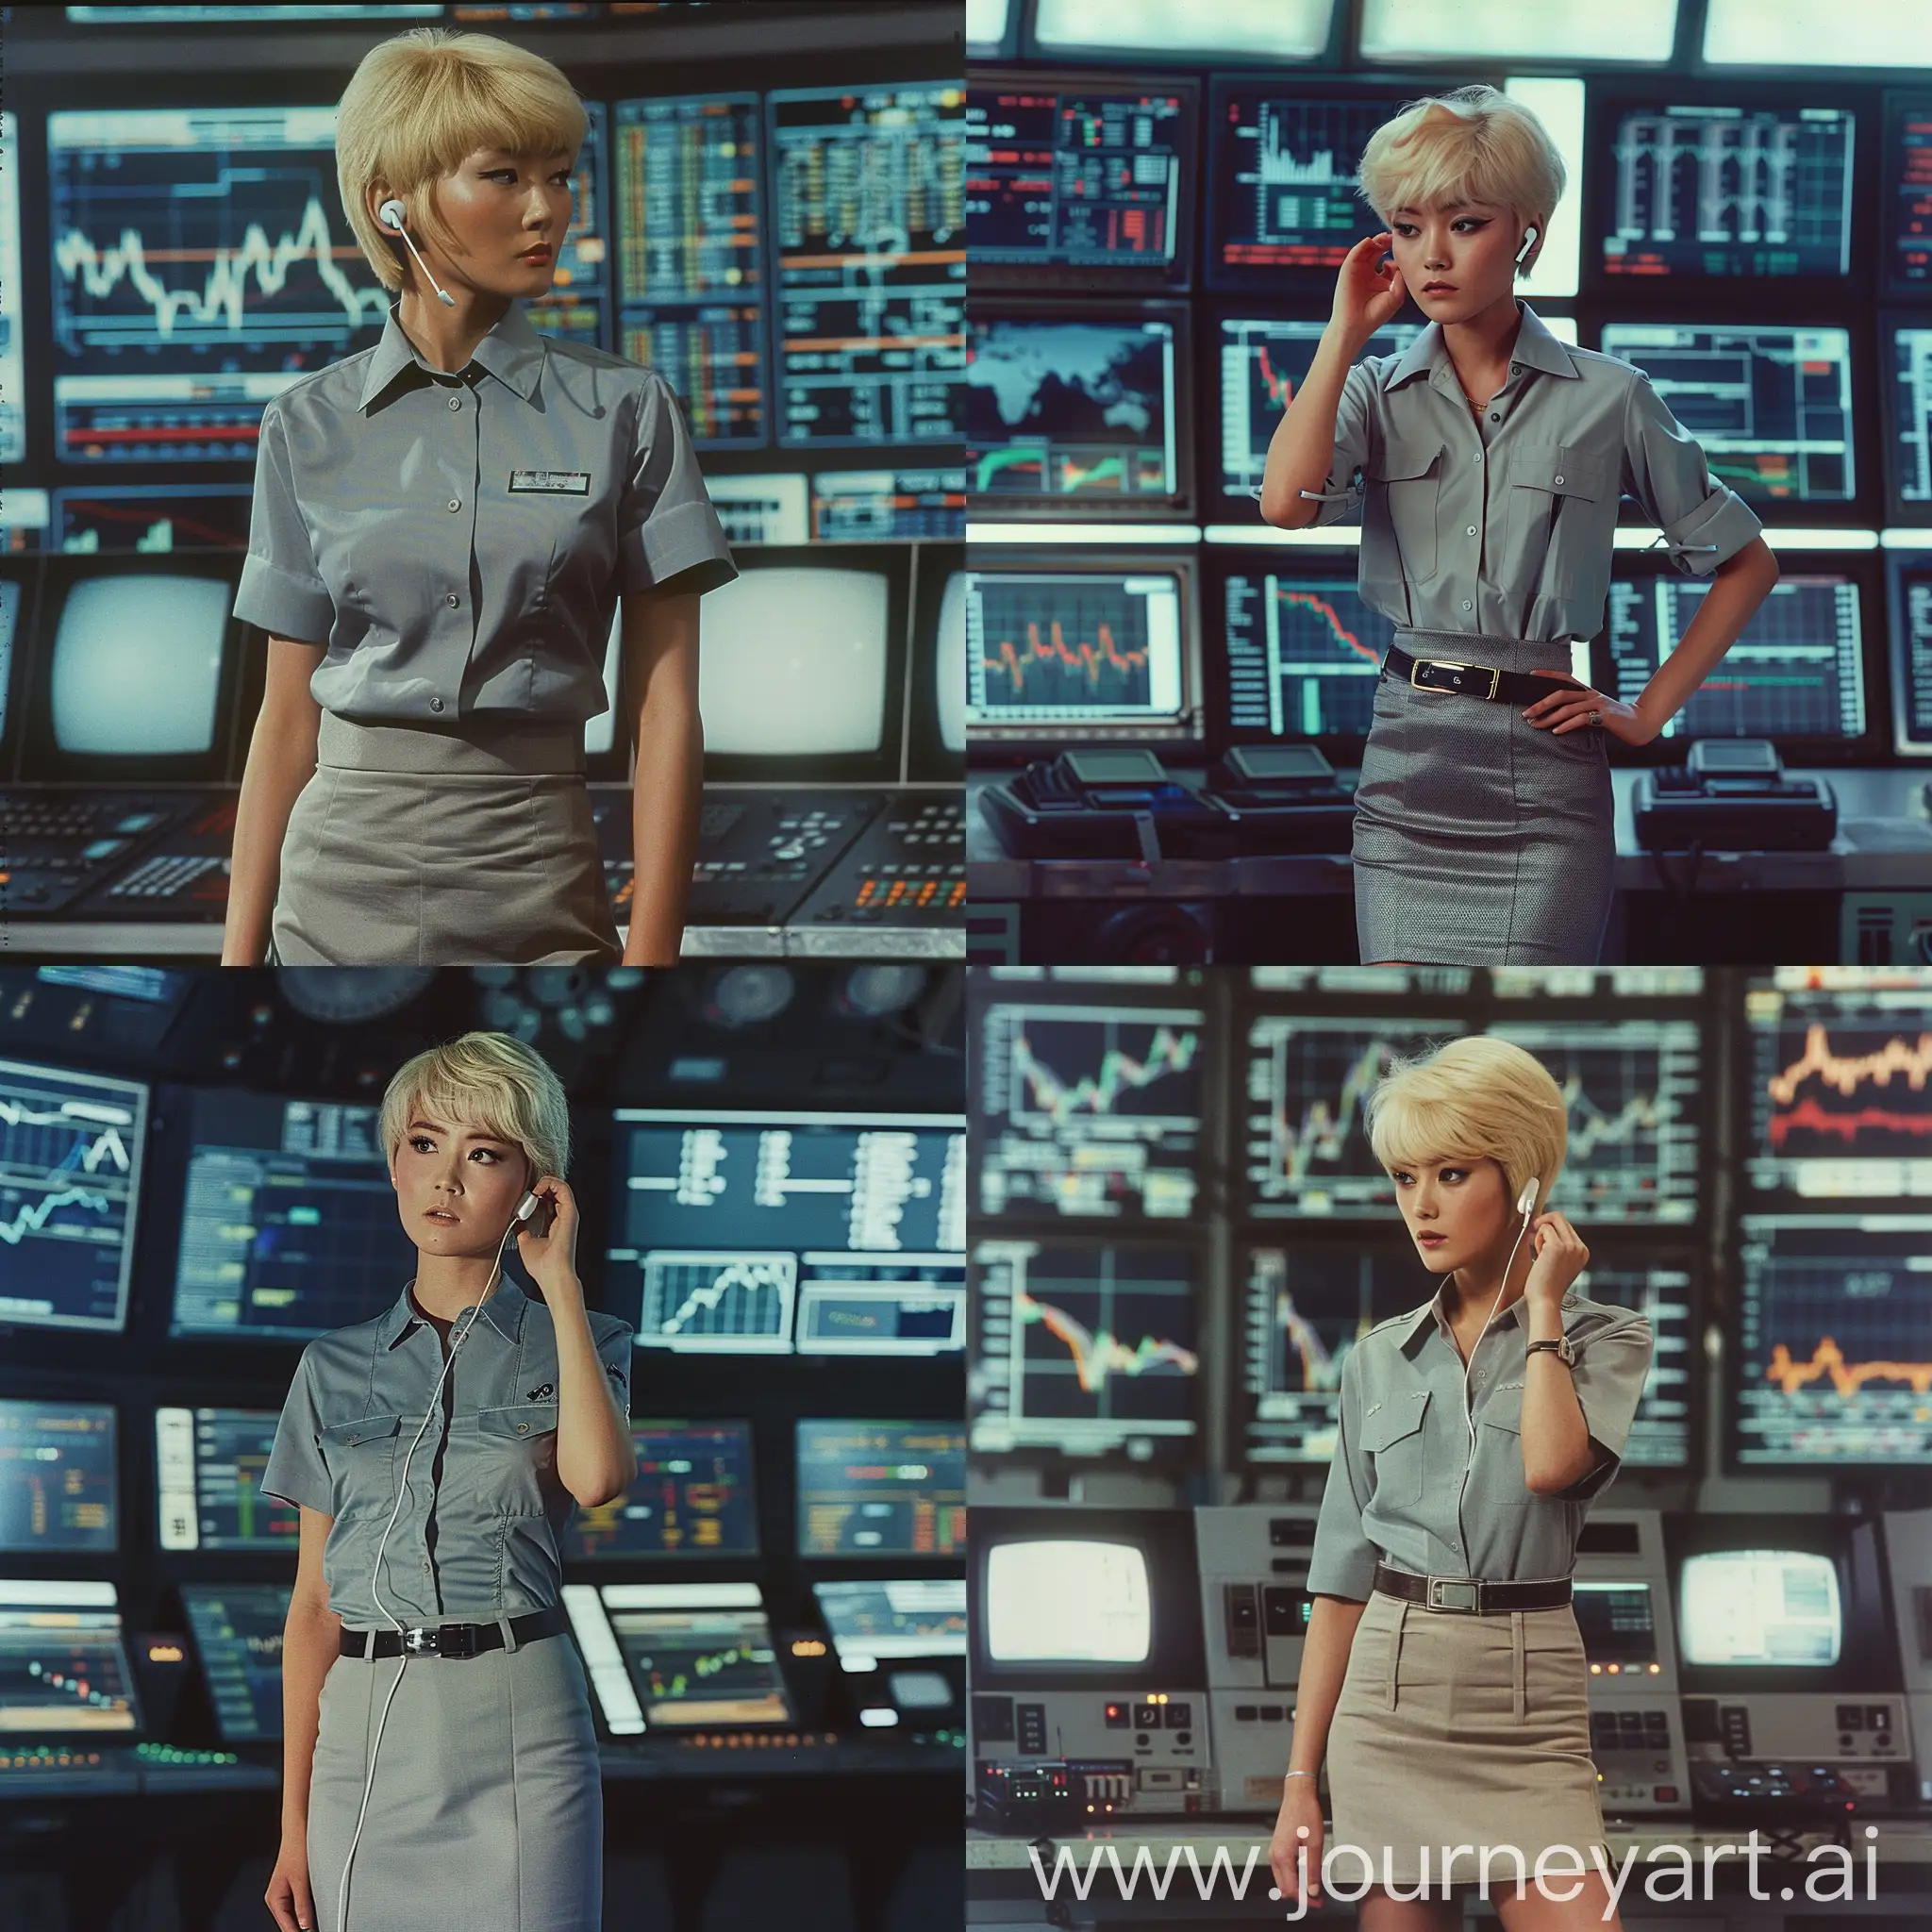 blond blonde with short hair mixed Asian and European in a gray shirt and skirt with an earphone in her ear in front of a background of monitors and charts in a realistic sci-fi style, 1980